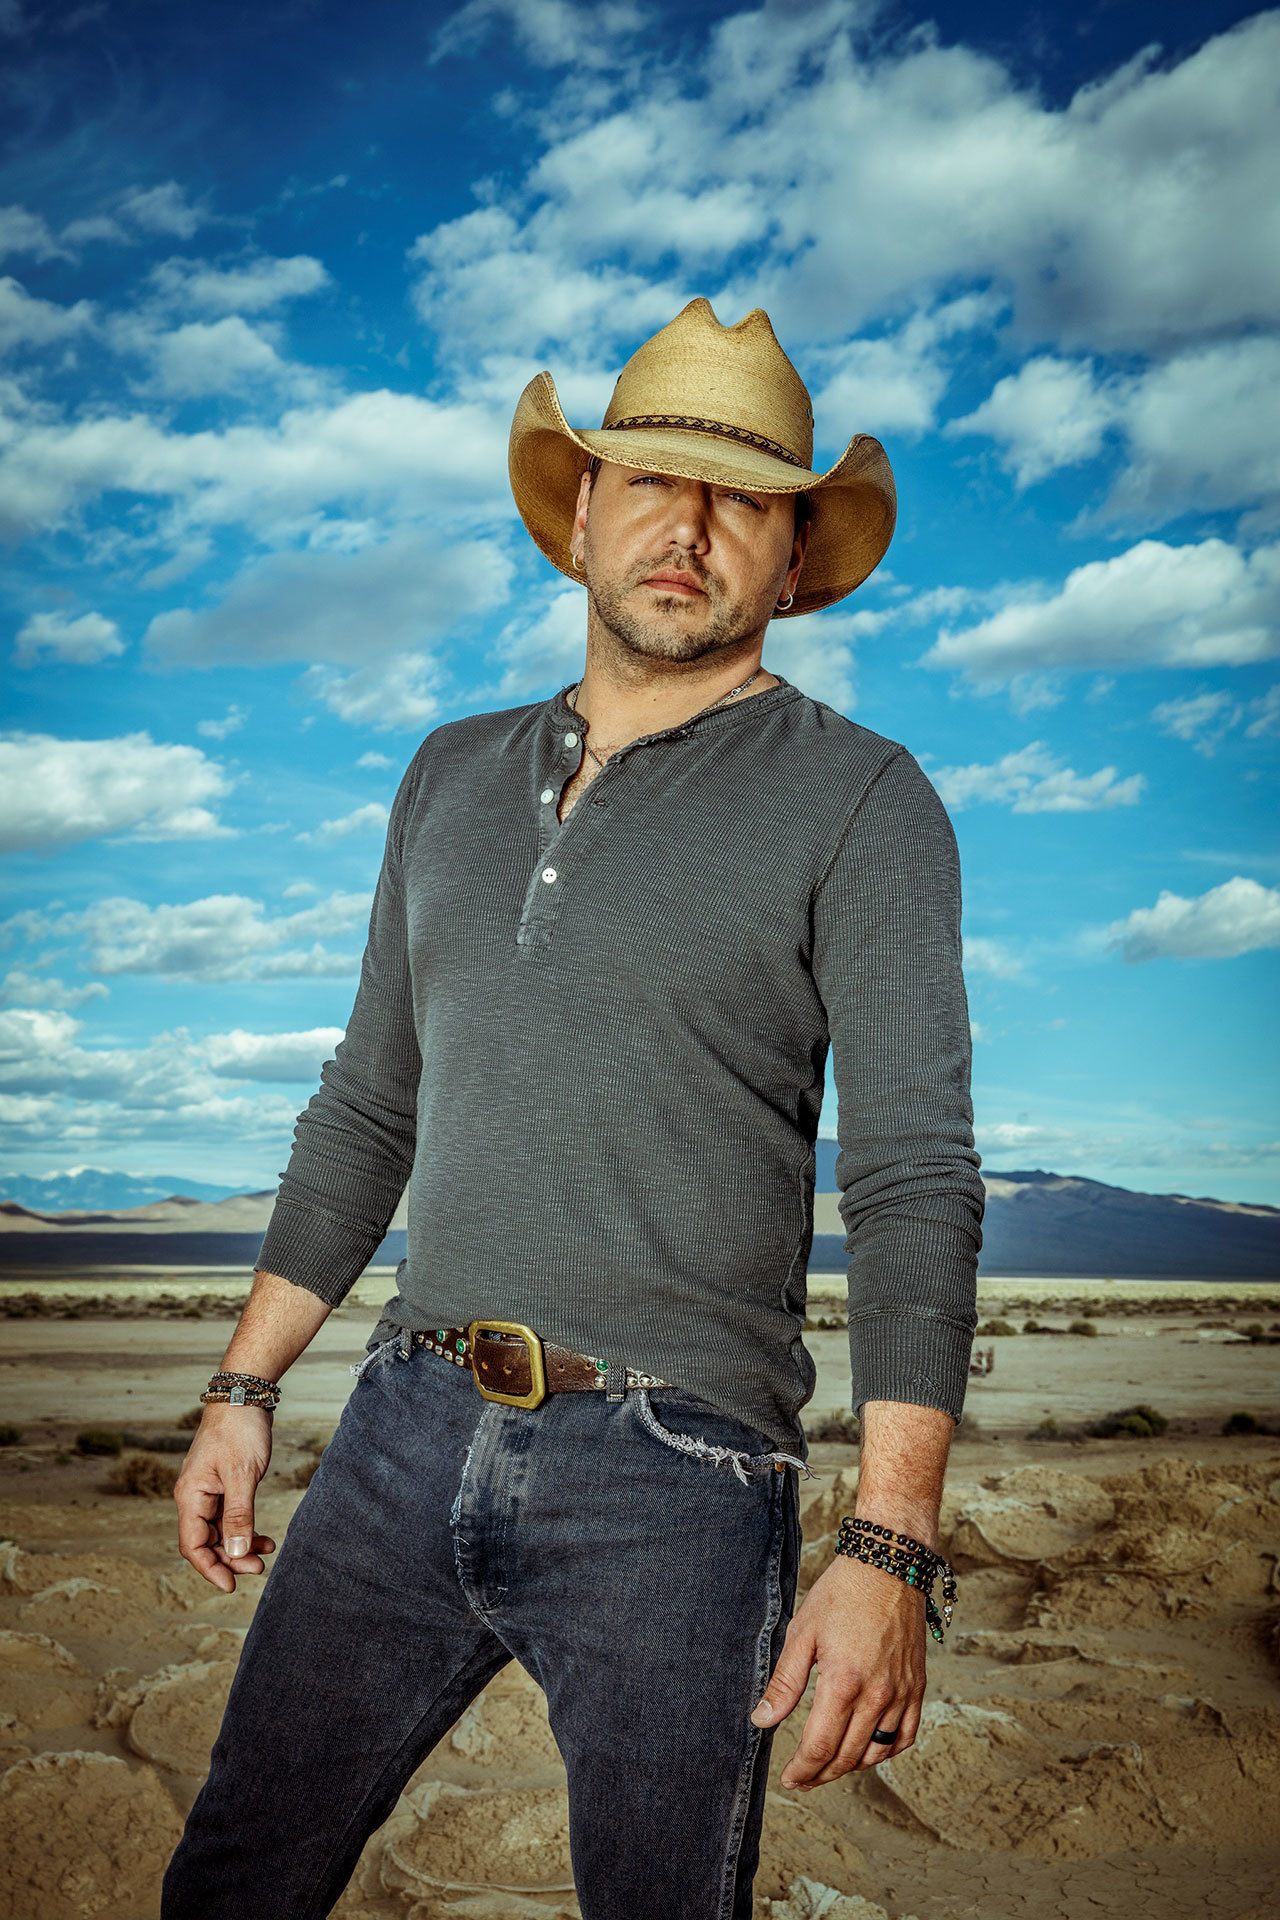 With his seventh album, They Don’t Know, Jason Aldean continues to lead the way, advancing the sound and style that helped define today’s country music. COURTESY PHOTO